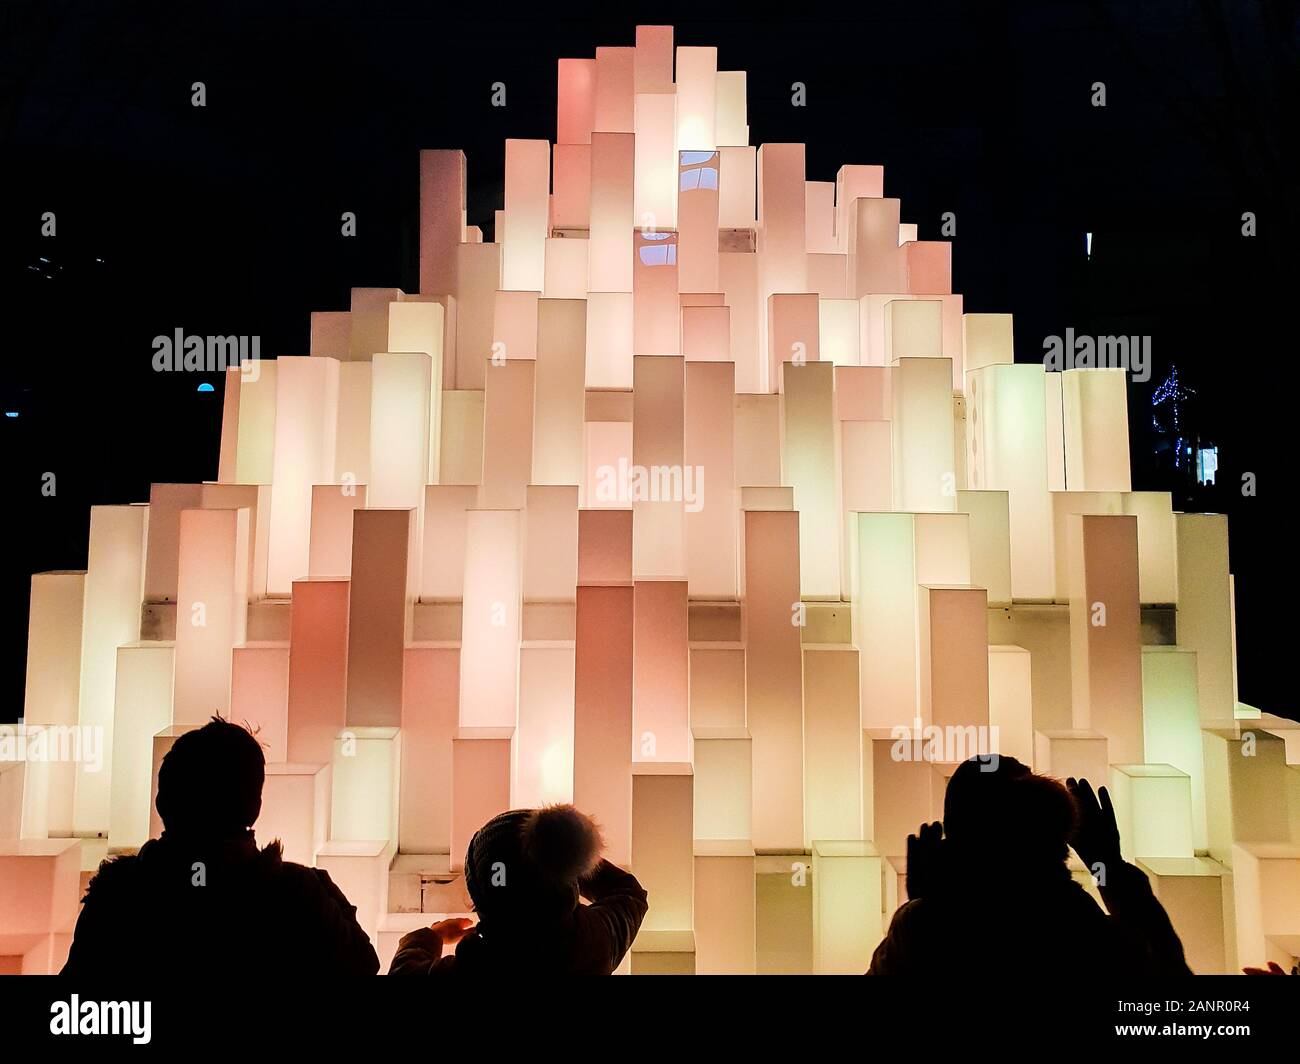 Har det dårligt ledsage i stedet Canary Wharf, London.UK 18 Jan 2020 - Members of public interact with art  installation Mountain of Light by Angus Muir Design at the Canary Wharf  Winter Light Festival. The annual light festival